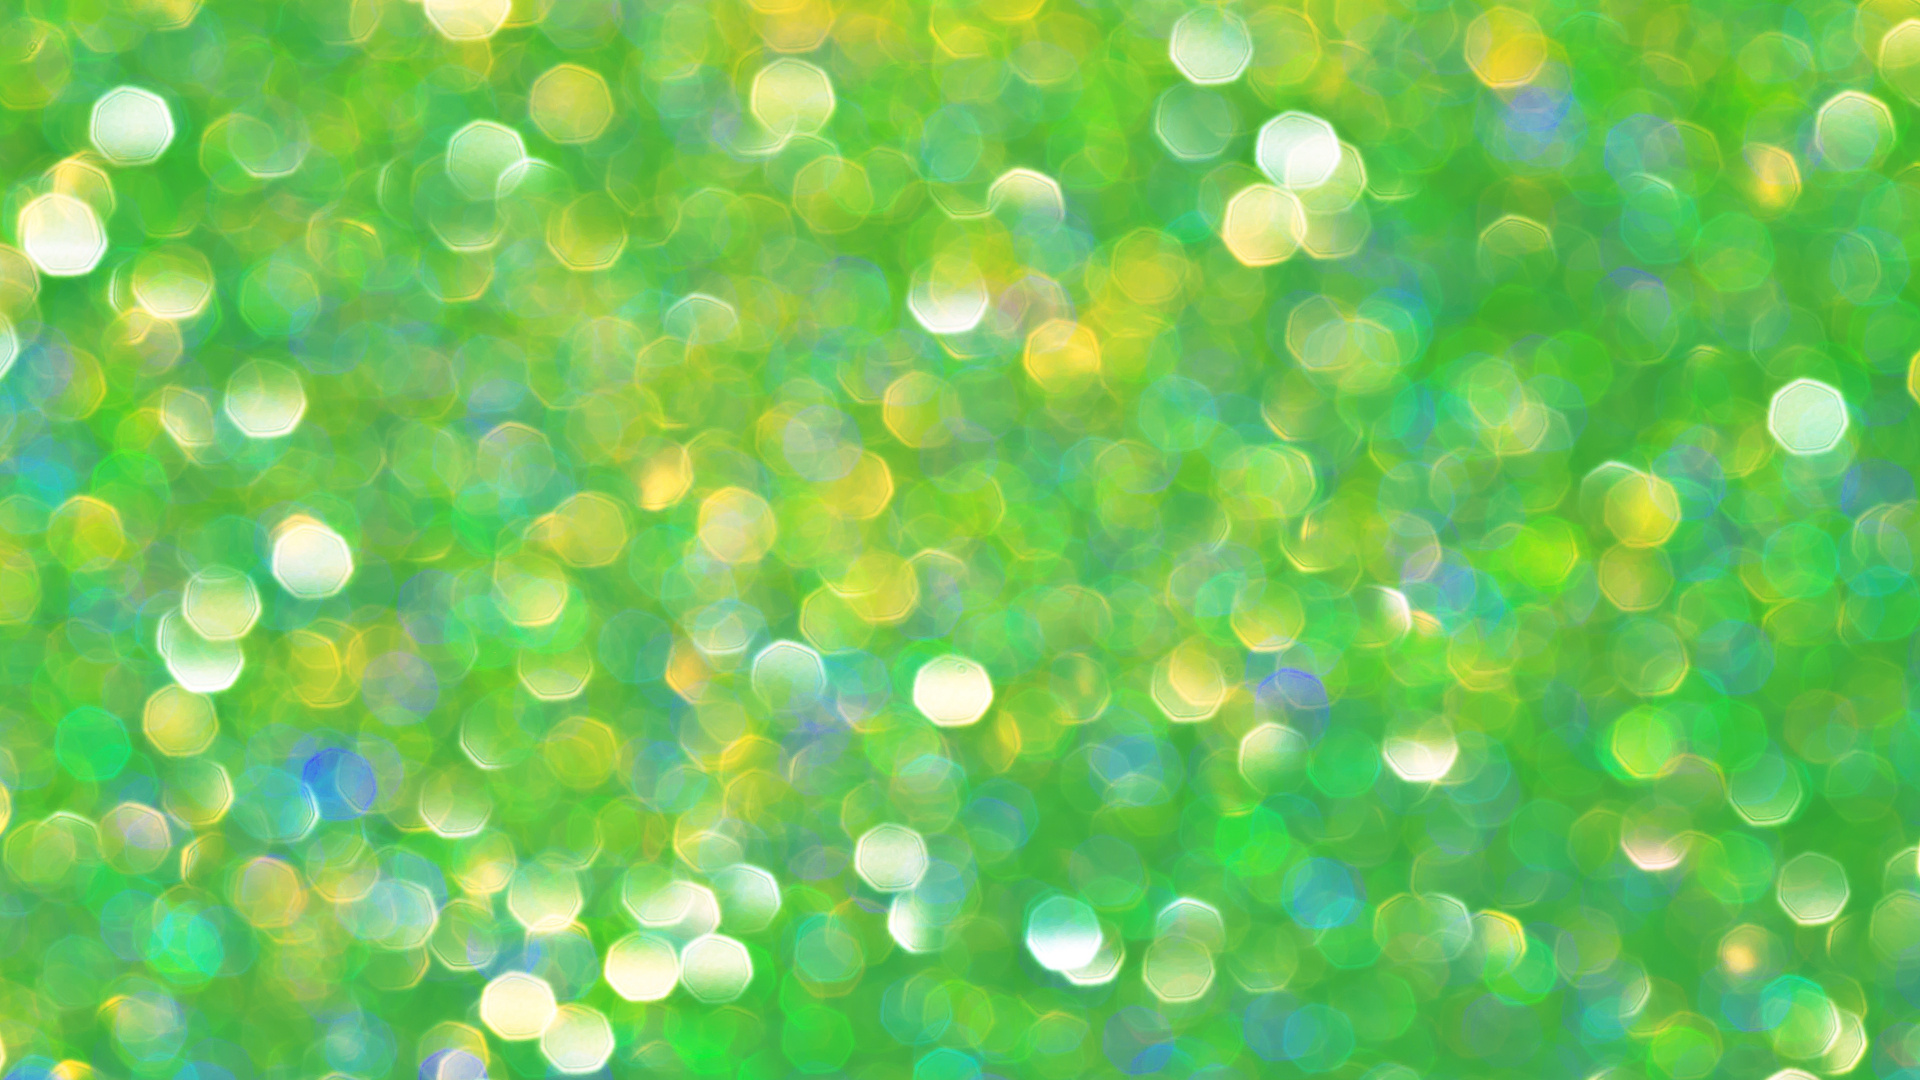 Green and White Bokeh Lights. Wallpaper in 1920x1080 Resolution